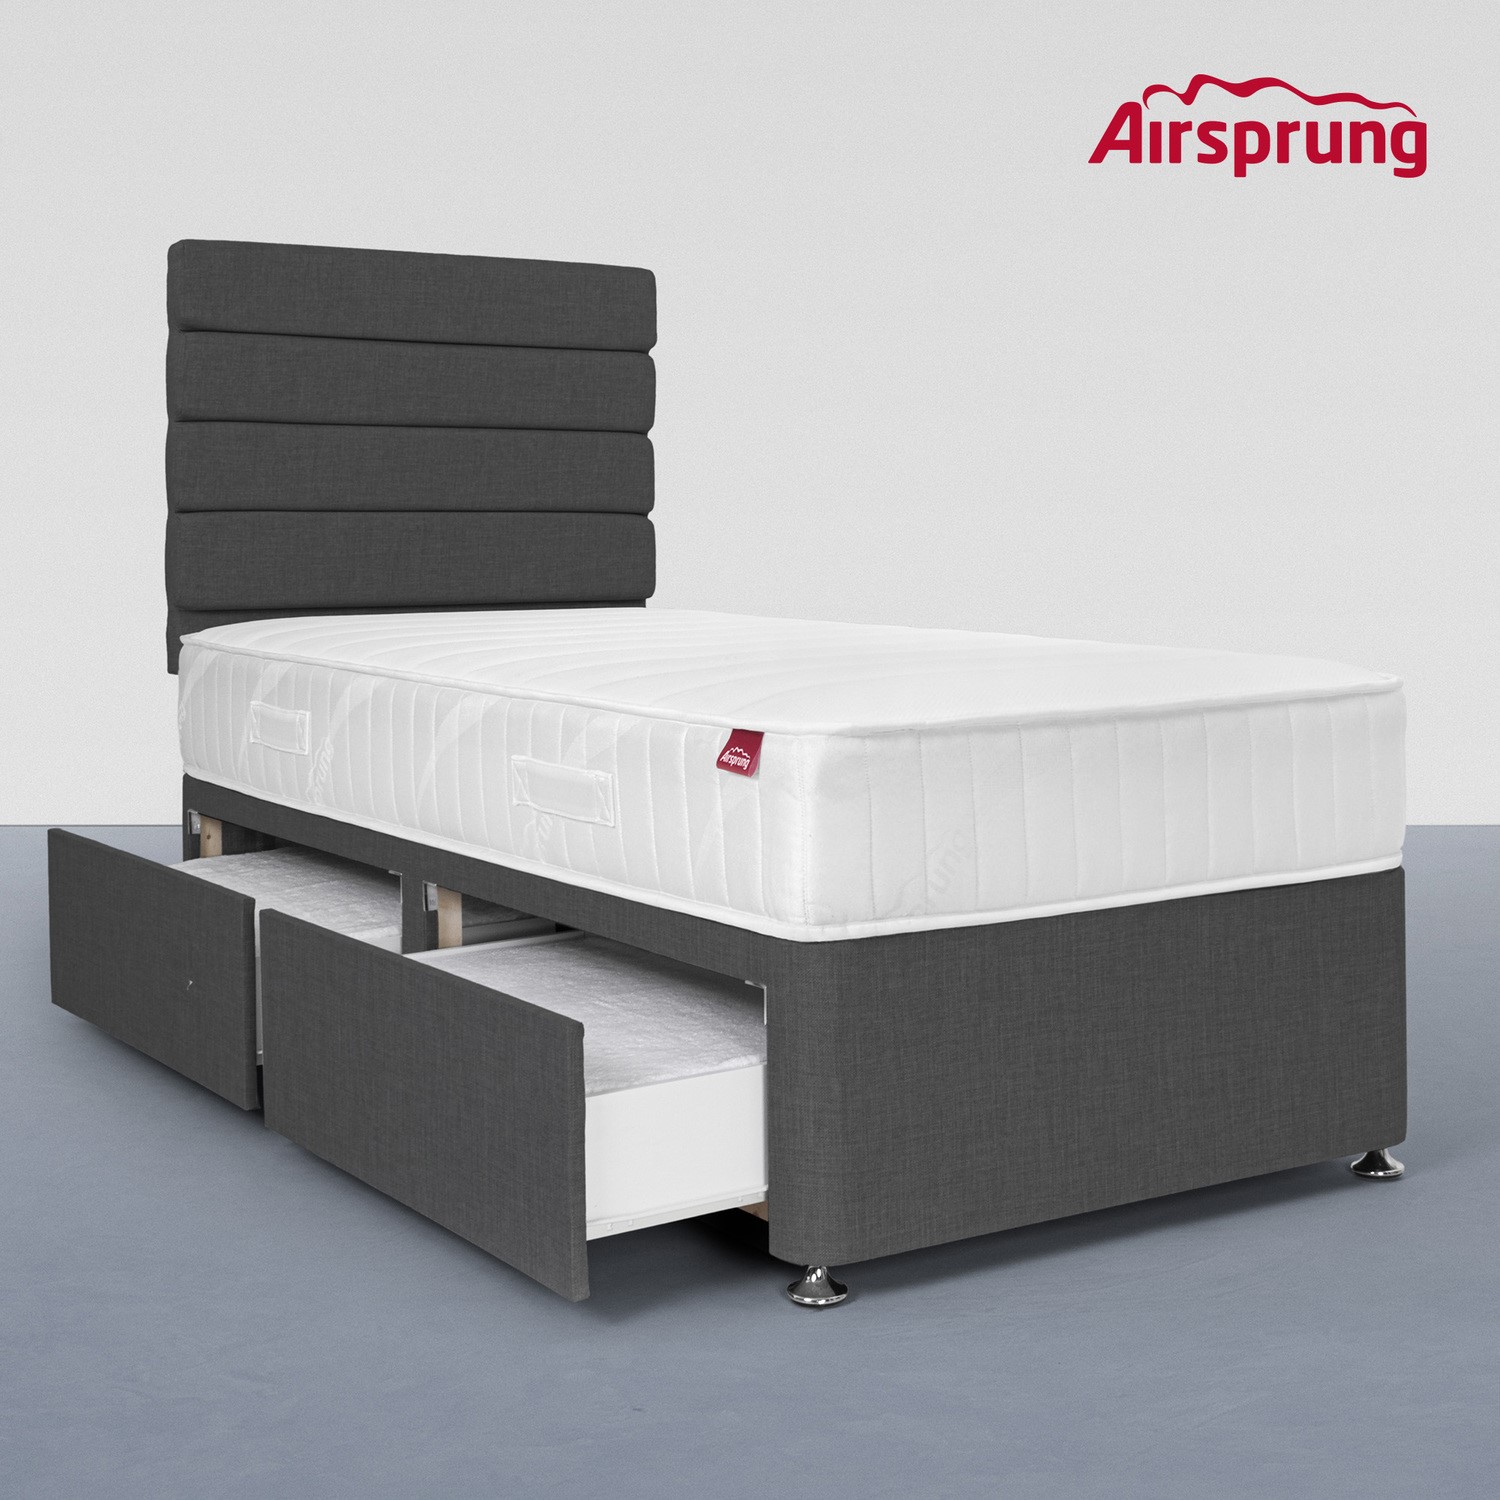 Read more about Airsprung single 2 drawer divan bed with comfort mattress charcoal